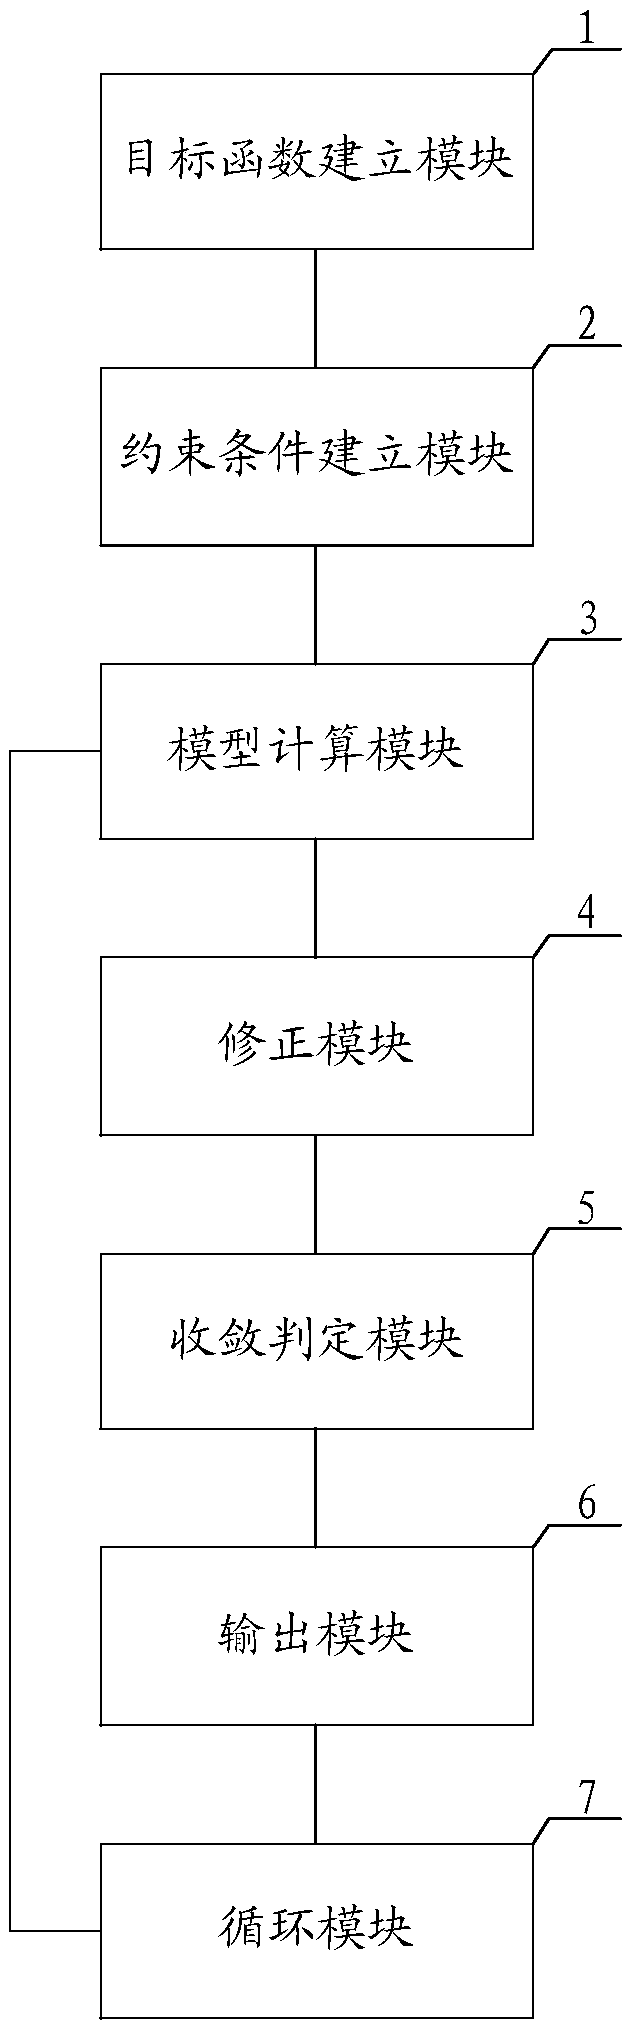 Security constrained economic dispatching method, system, device and readable storage medium